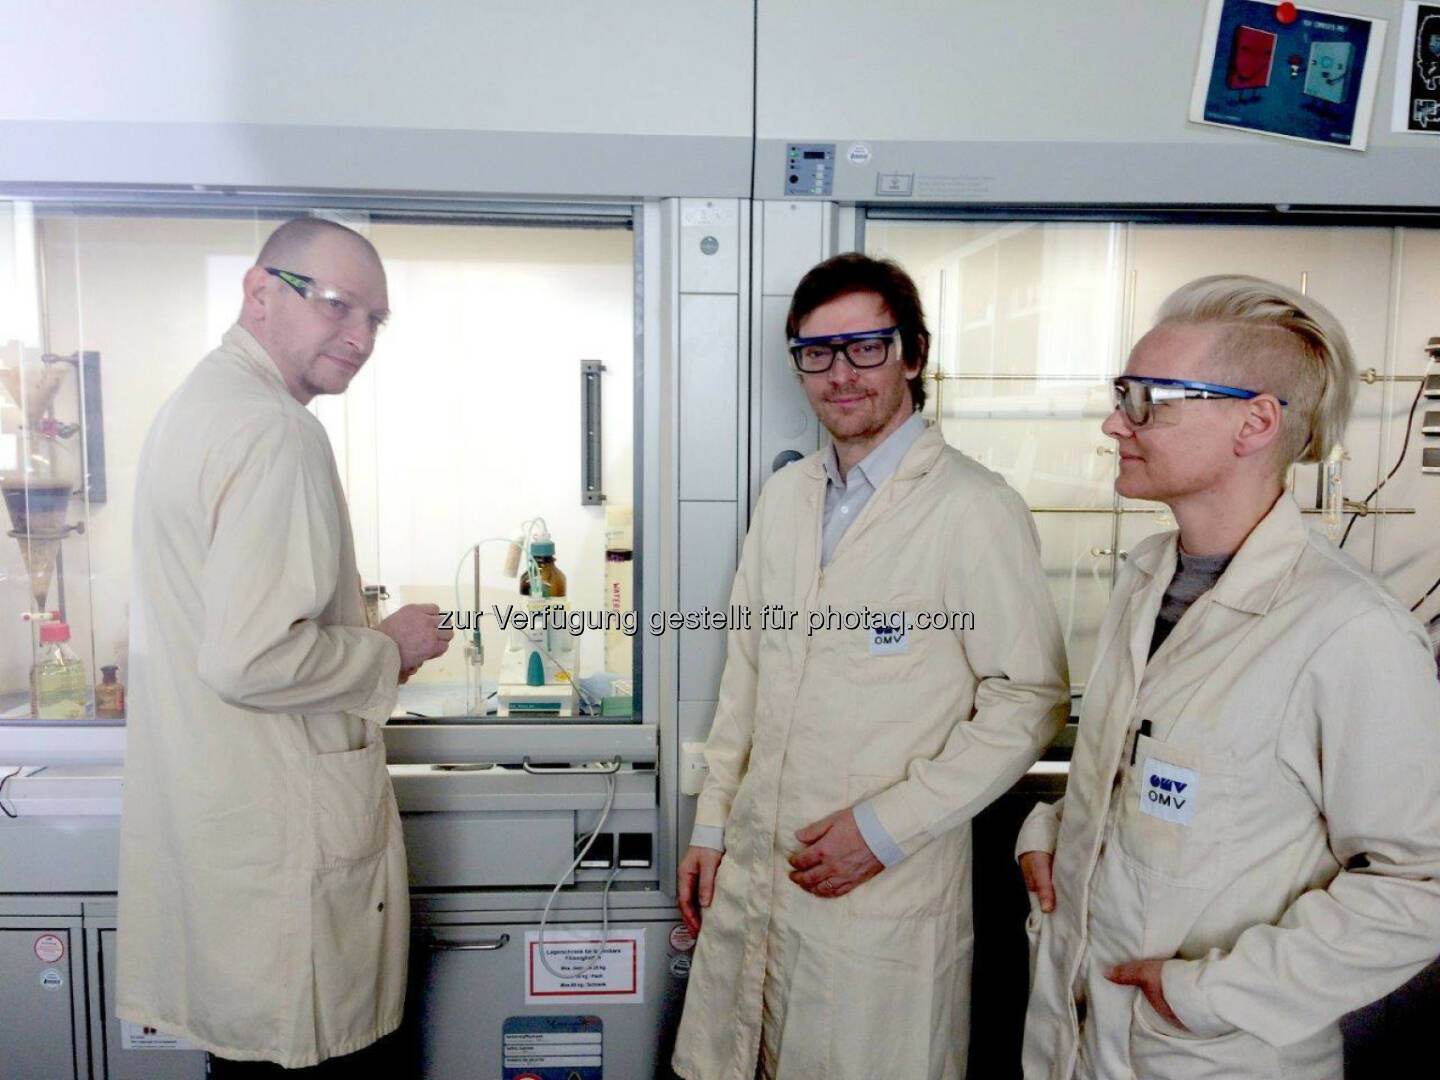 It was a pleasure to welcome Dr. Erwin Reisner at the OMV Tech Center & Lab in Gänserndorf last week. He is head of the Christian Doppler Laboratory for Sustainable Syngas Chemistry in Cambridge, where he and his team are researching the use of sunlight for future mobility: http://bit.ly/1r3BEqv (C) OMV